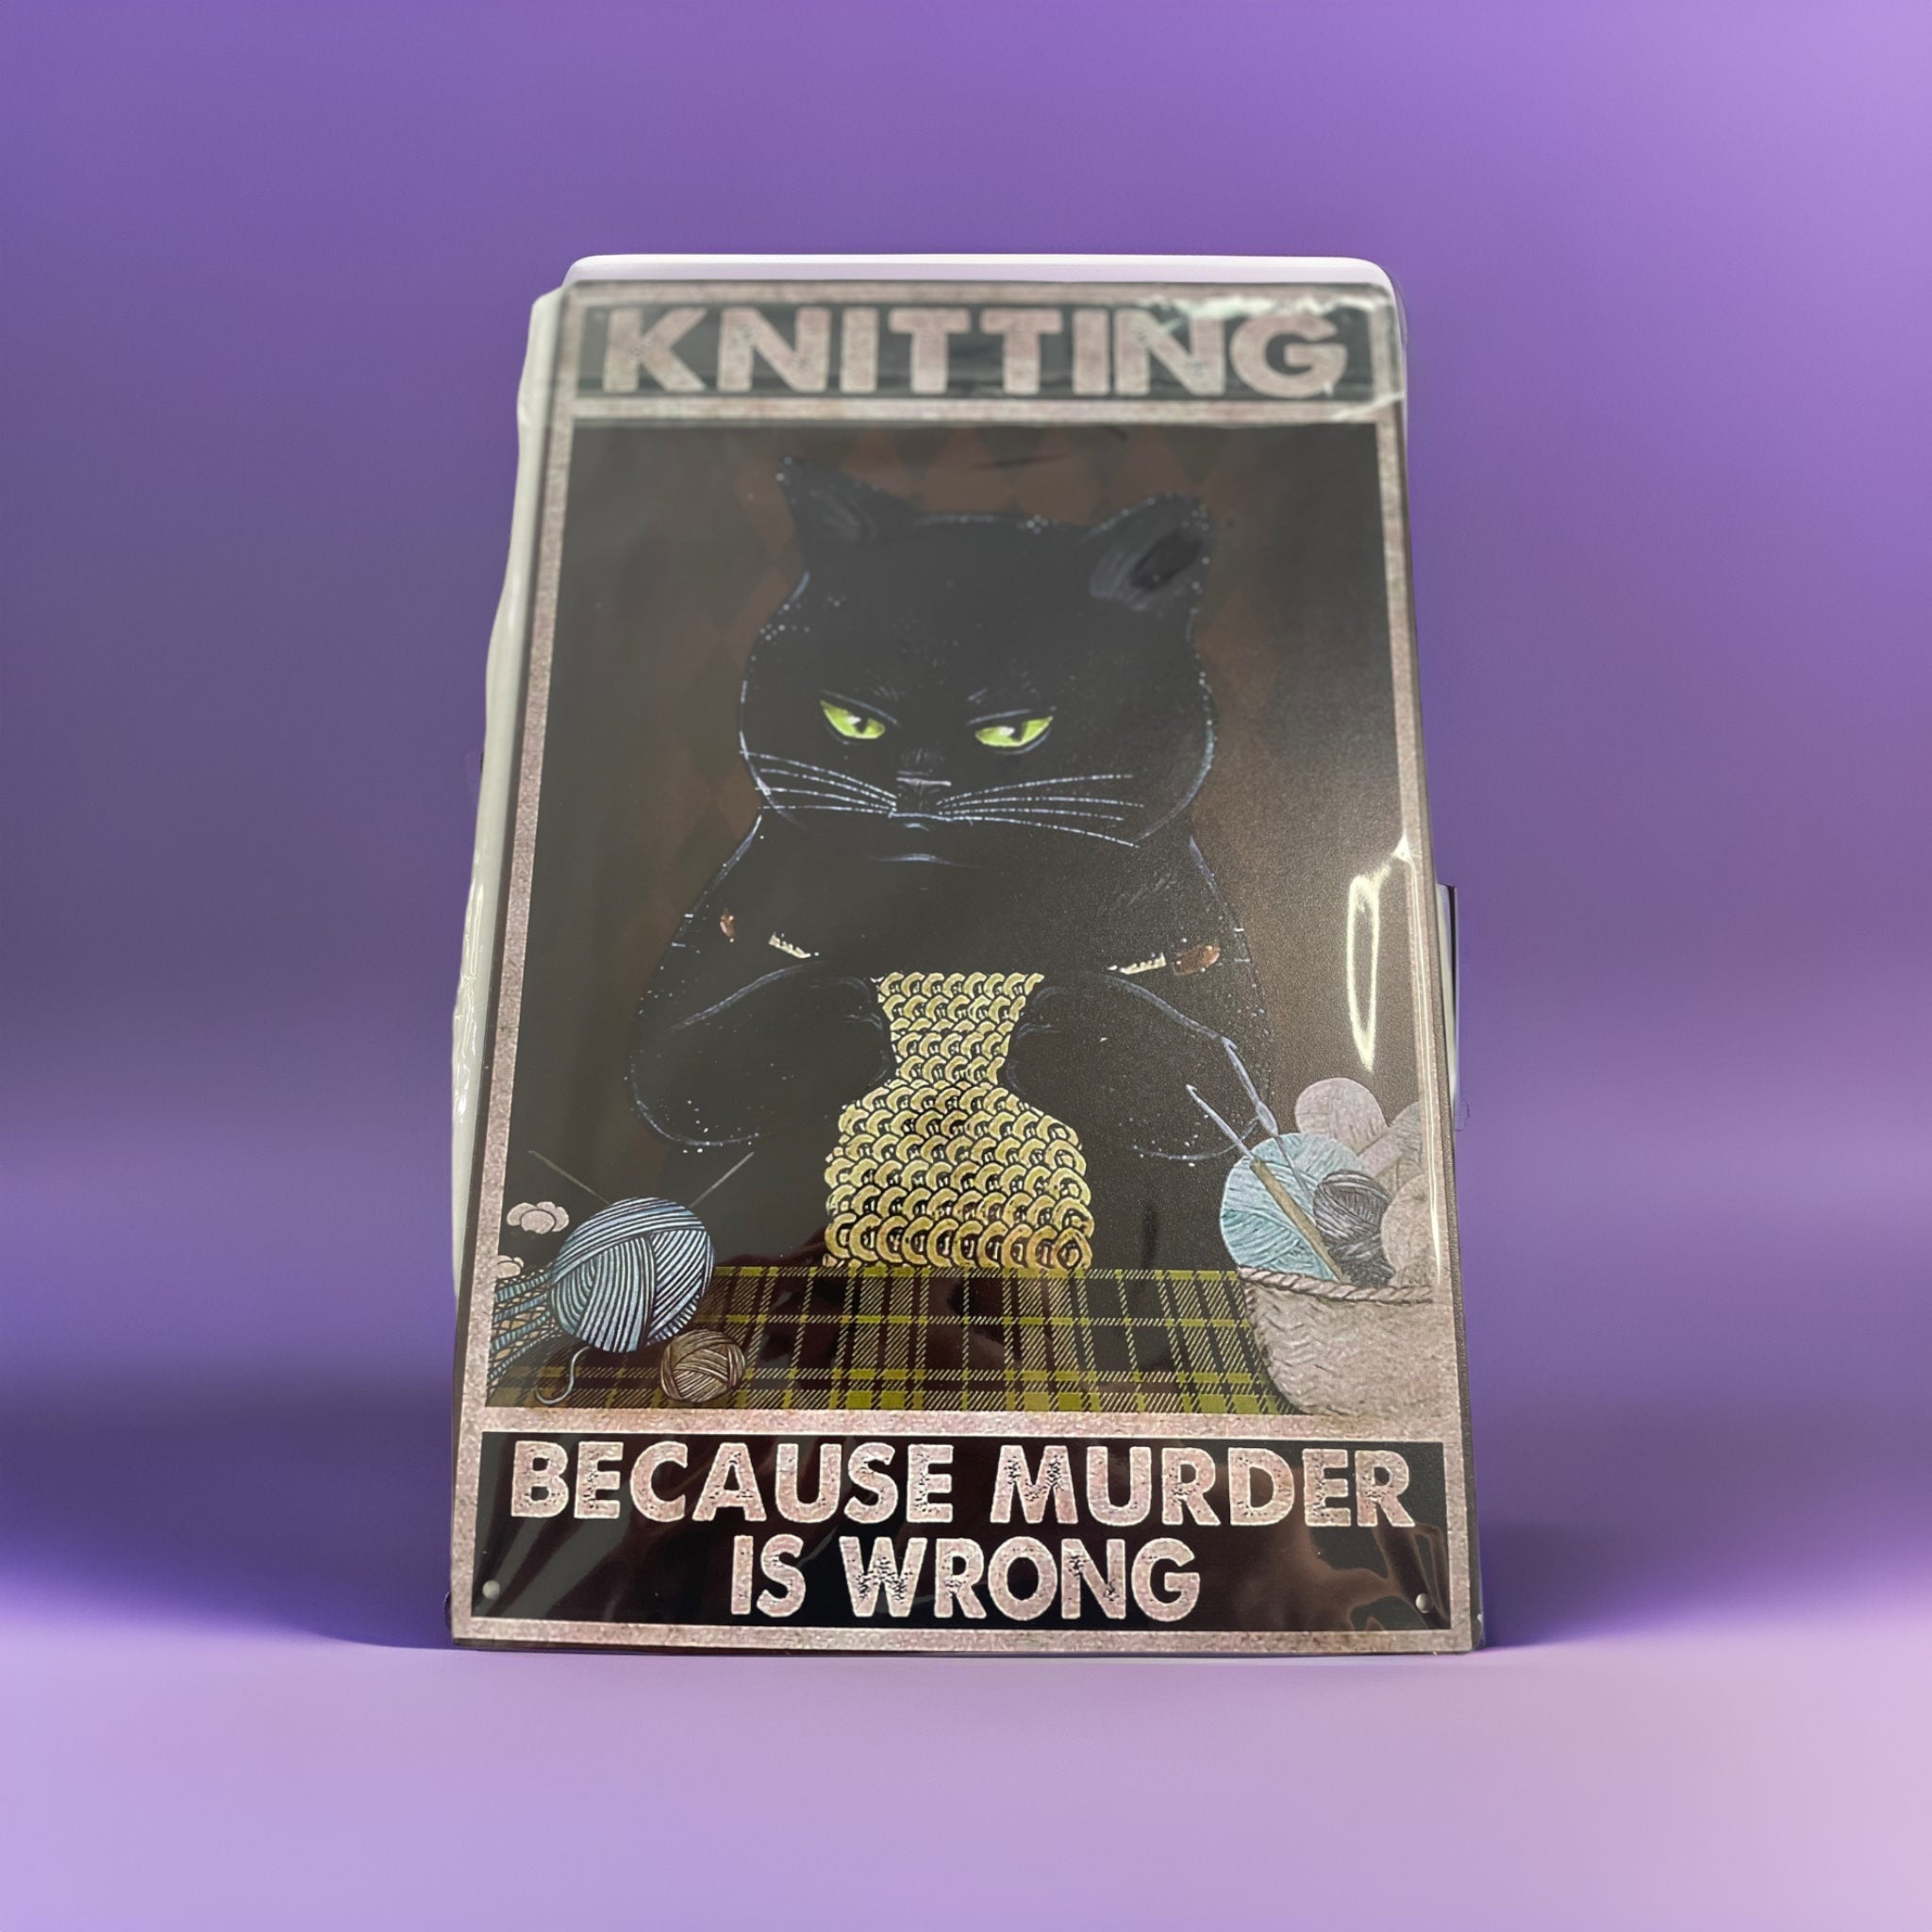 Vintage look Cat Themed Tin Wall Art - Sewing - Because Murder is Wrong